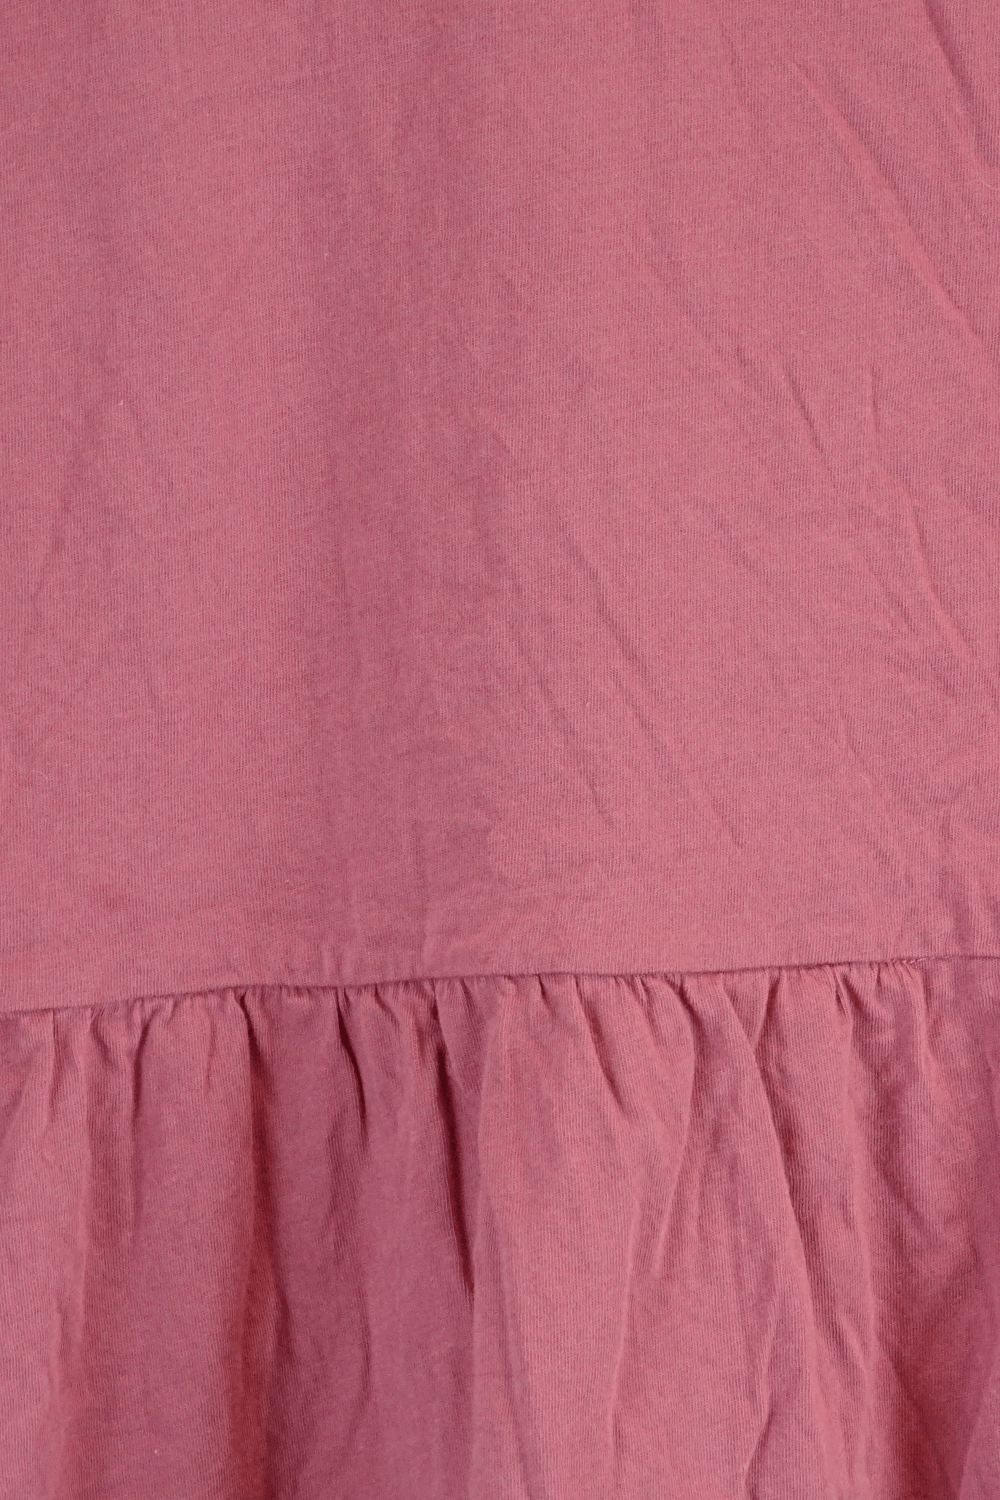 Sussan Pink T-Shirt S